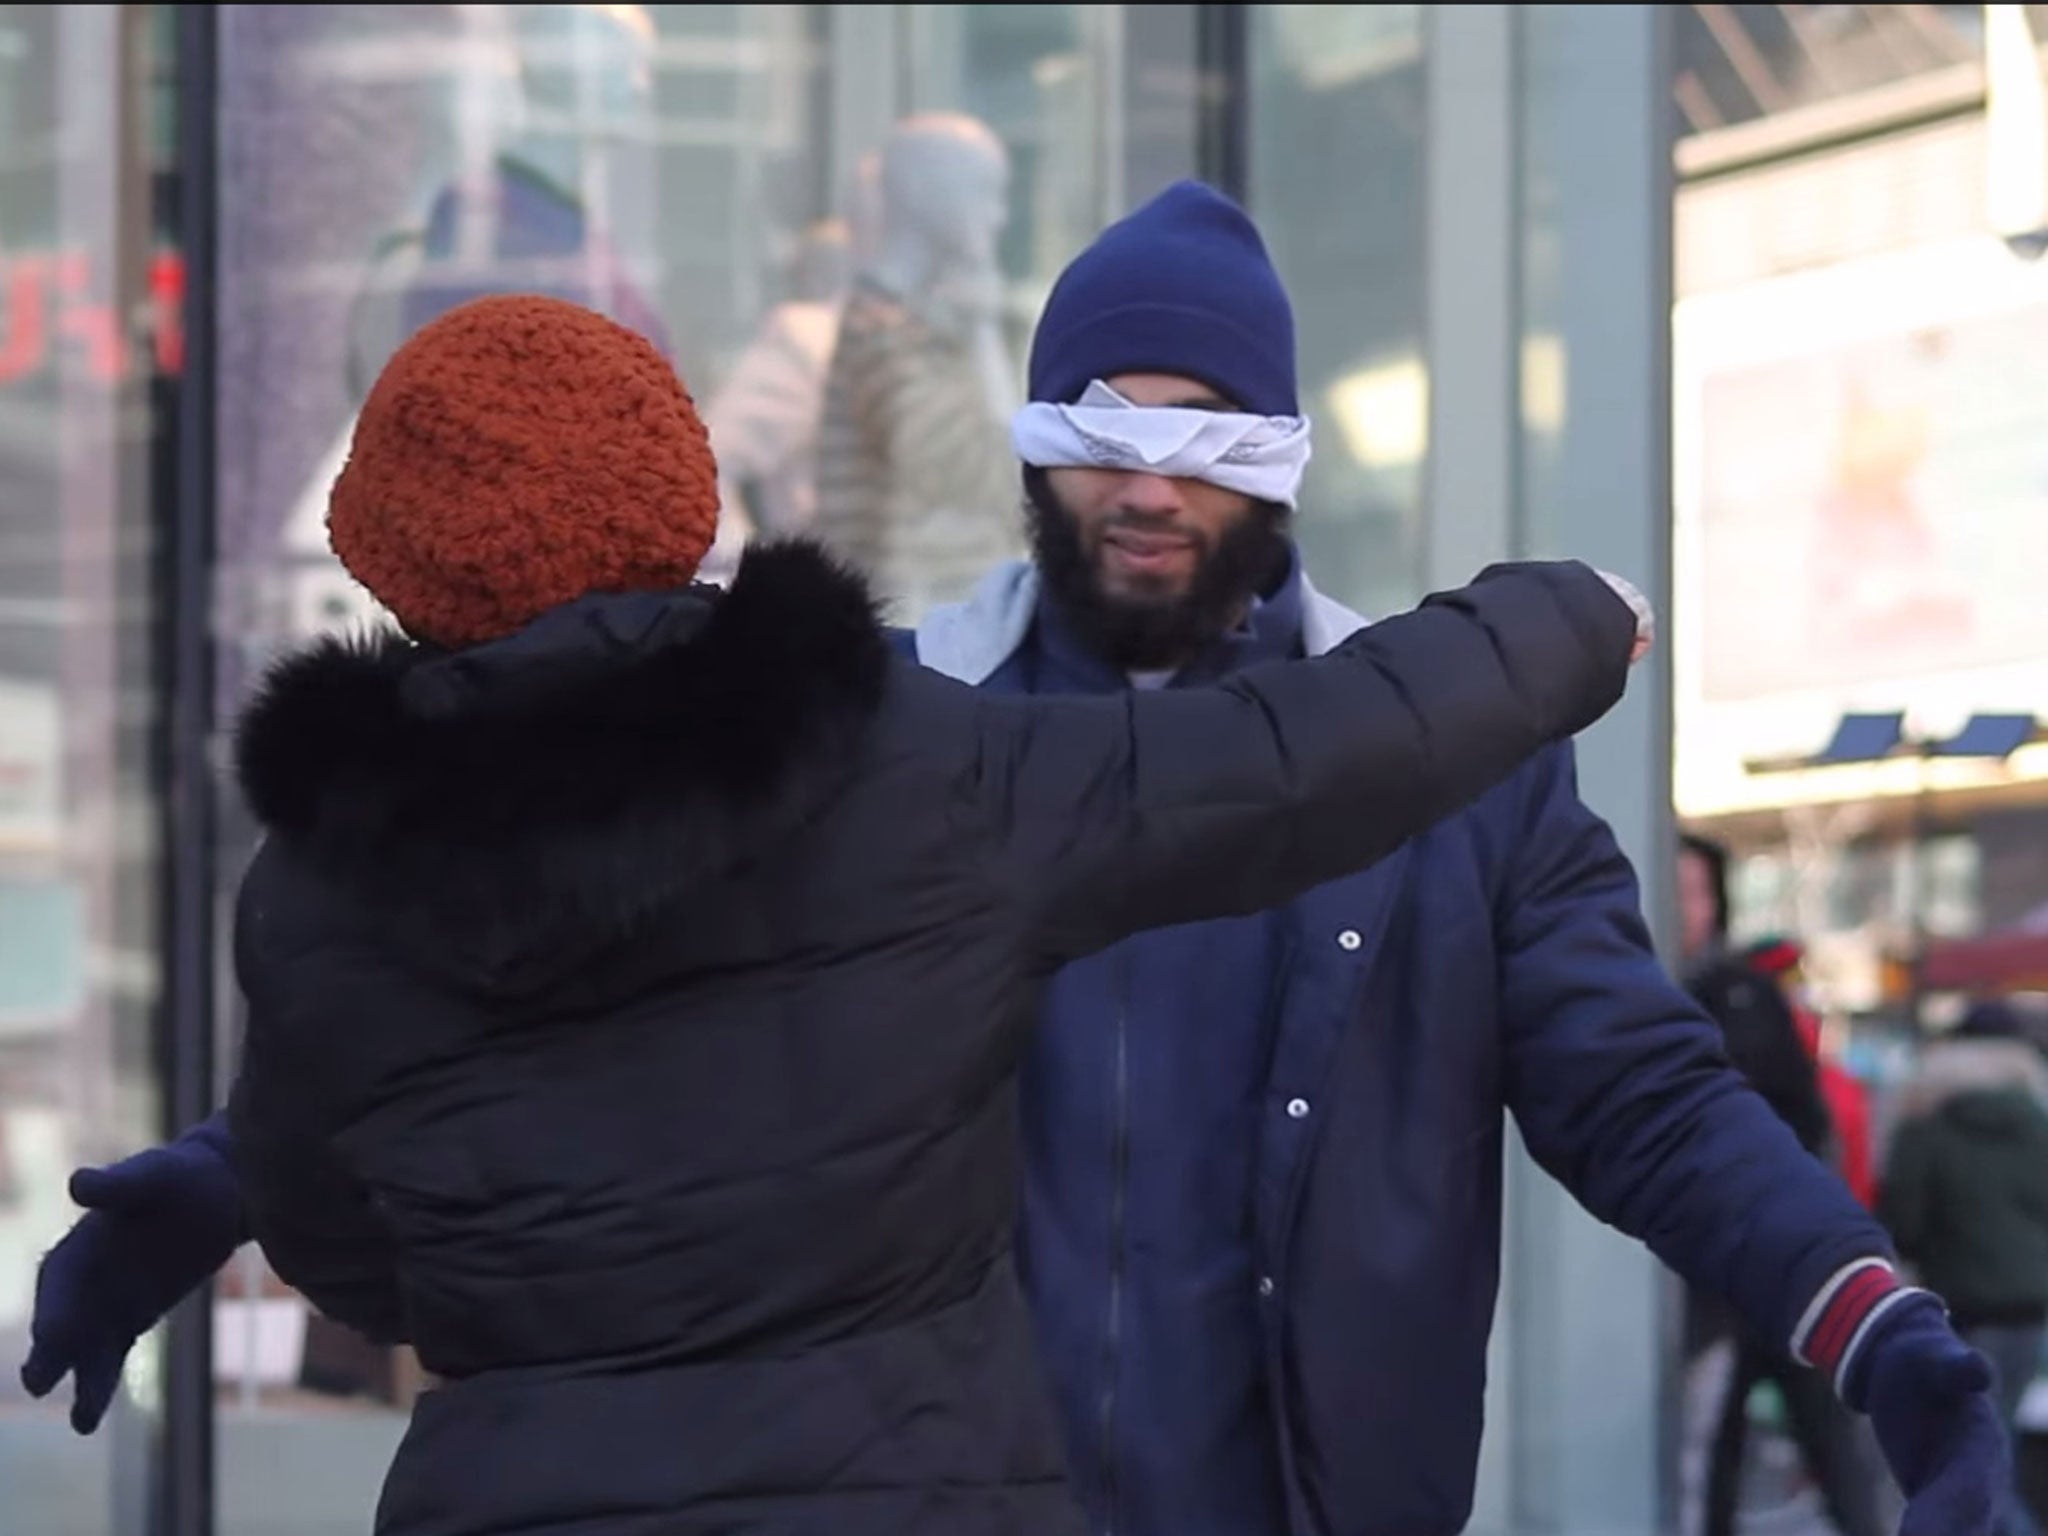 Blindfolded Muslim asks people to 'show trust with a hug' in heartwarming social experiment